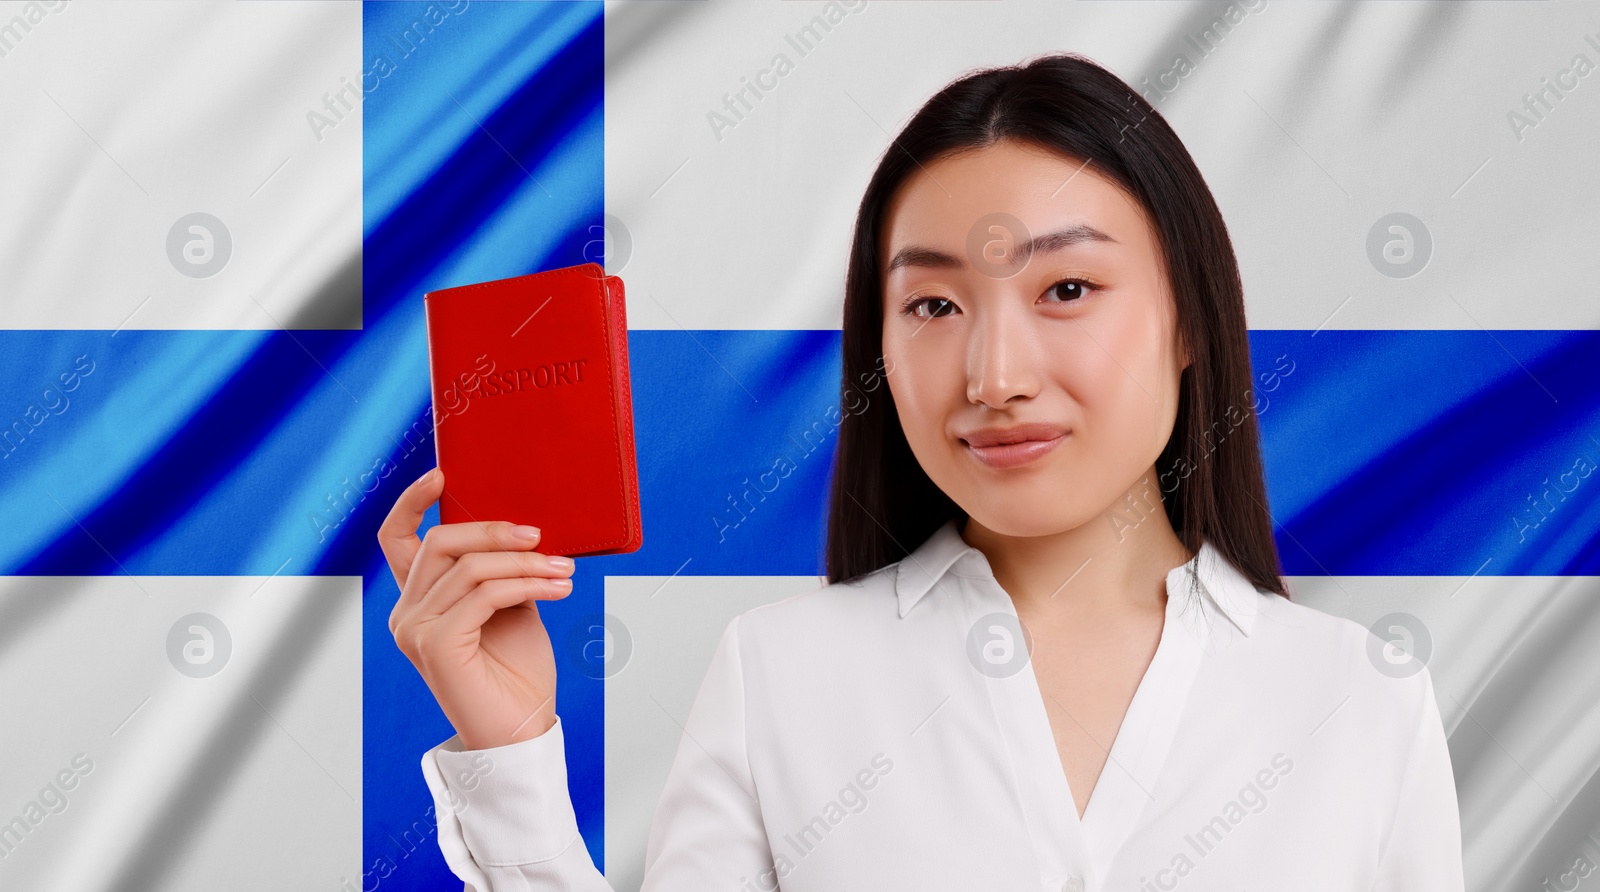 Image of Immigration. Woman with passport against national flagFinland. Banner design